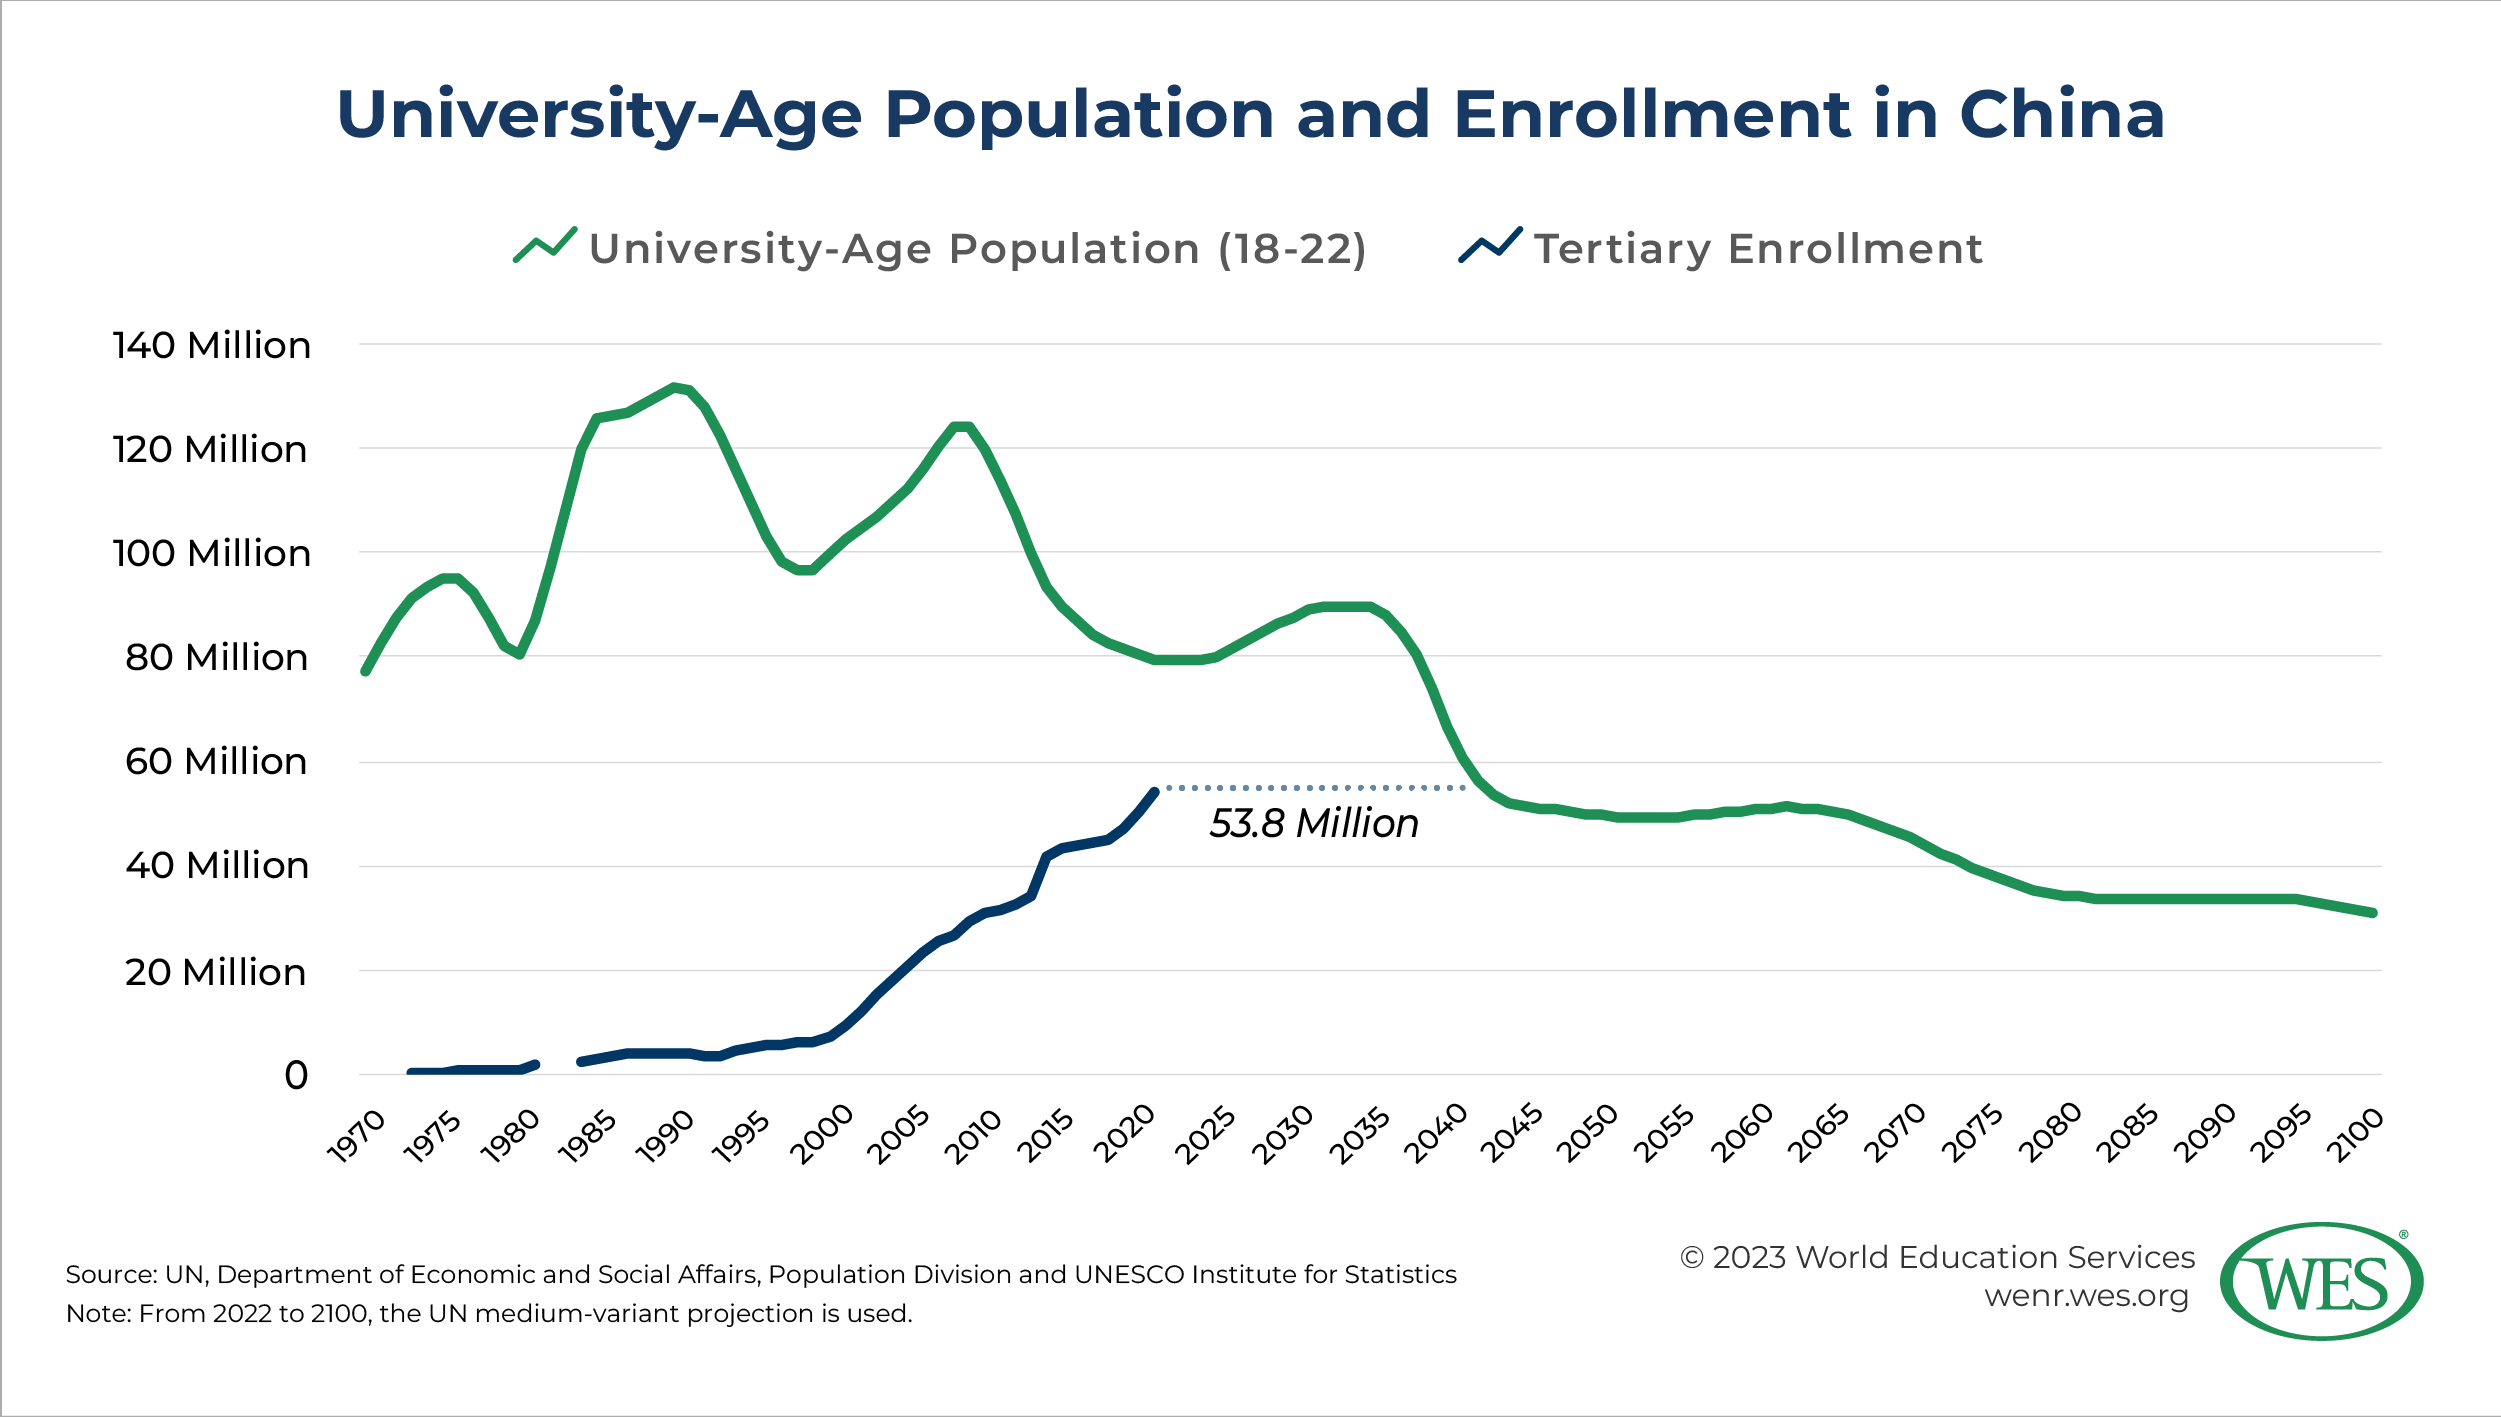 A chart showing the university-age population and university enrollment in China between 1970 and 2100.